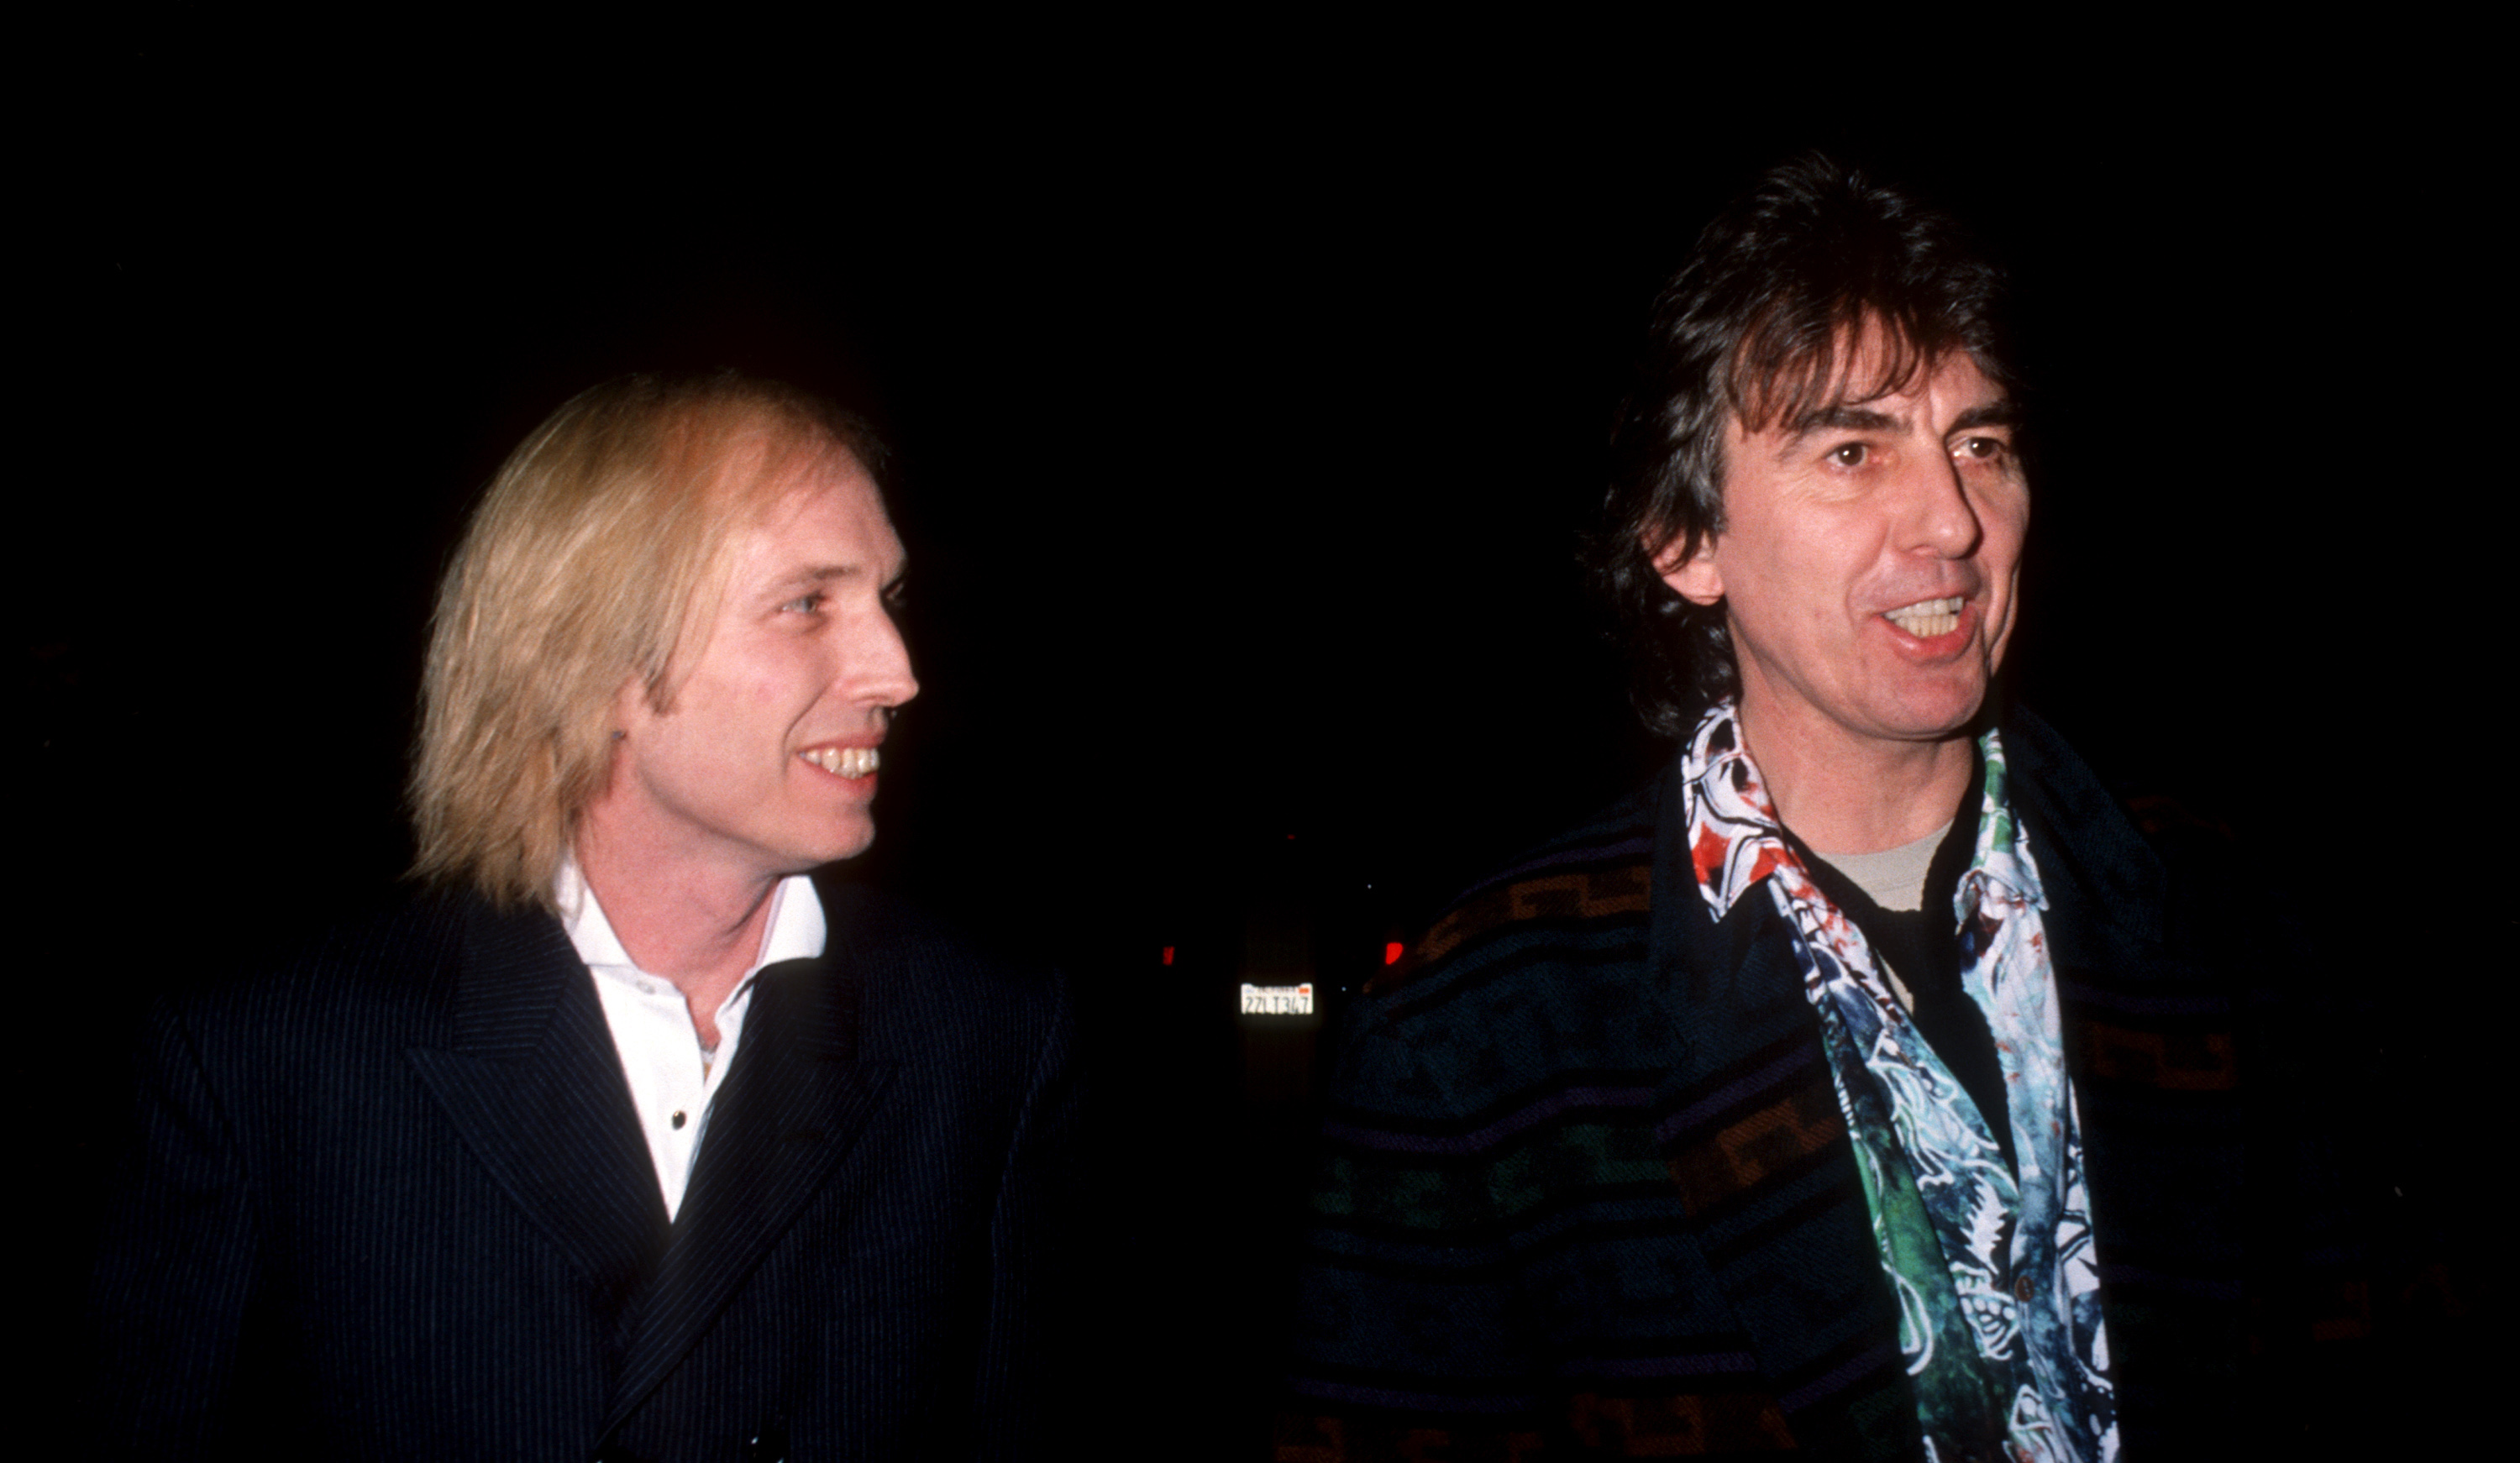 Tom Petty and George Harrison wear black jackets and walk together outside.